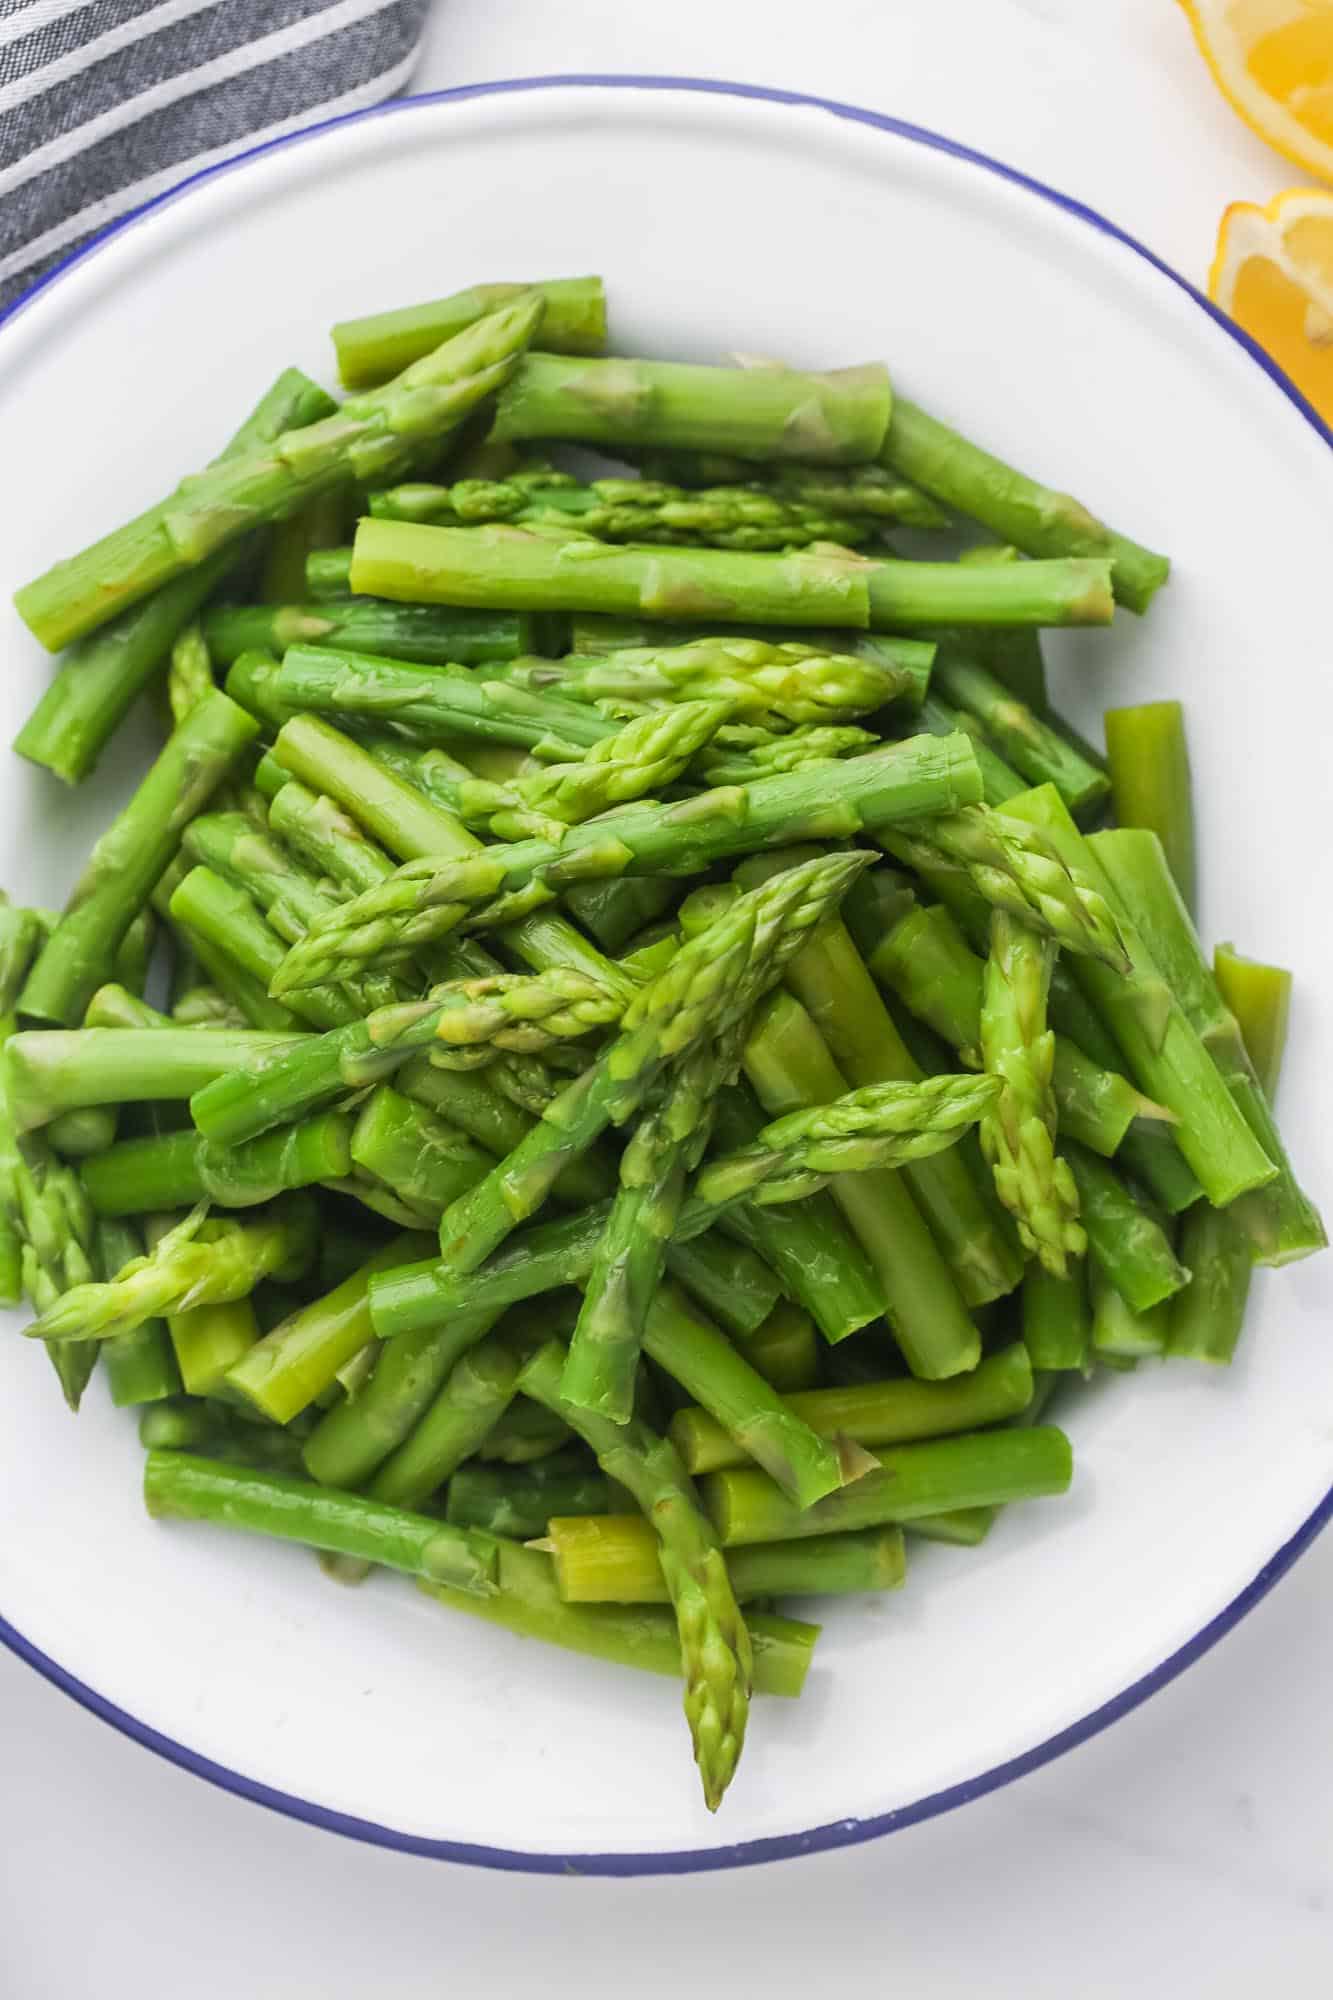 Blanched asparagus spears that are cut into 2-inch pieces, on a white plate.